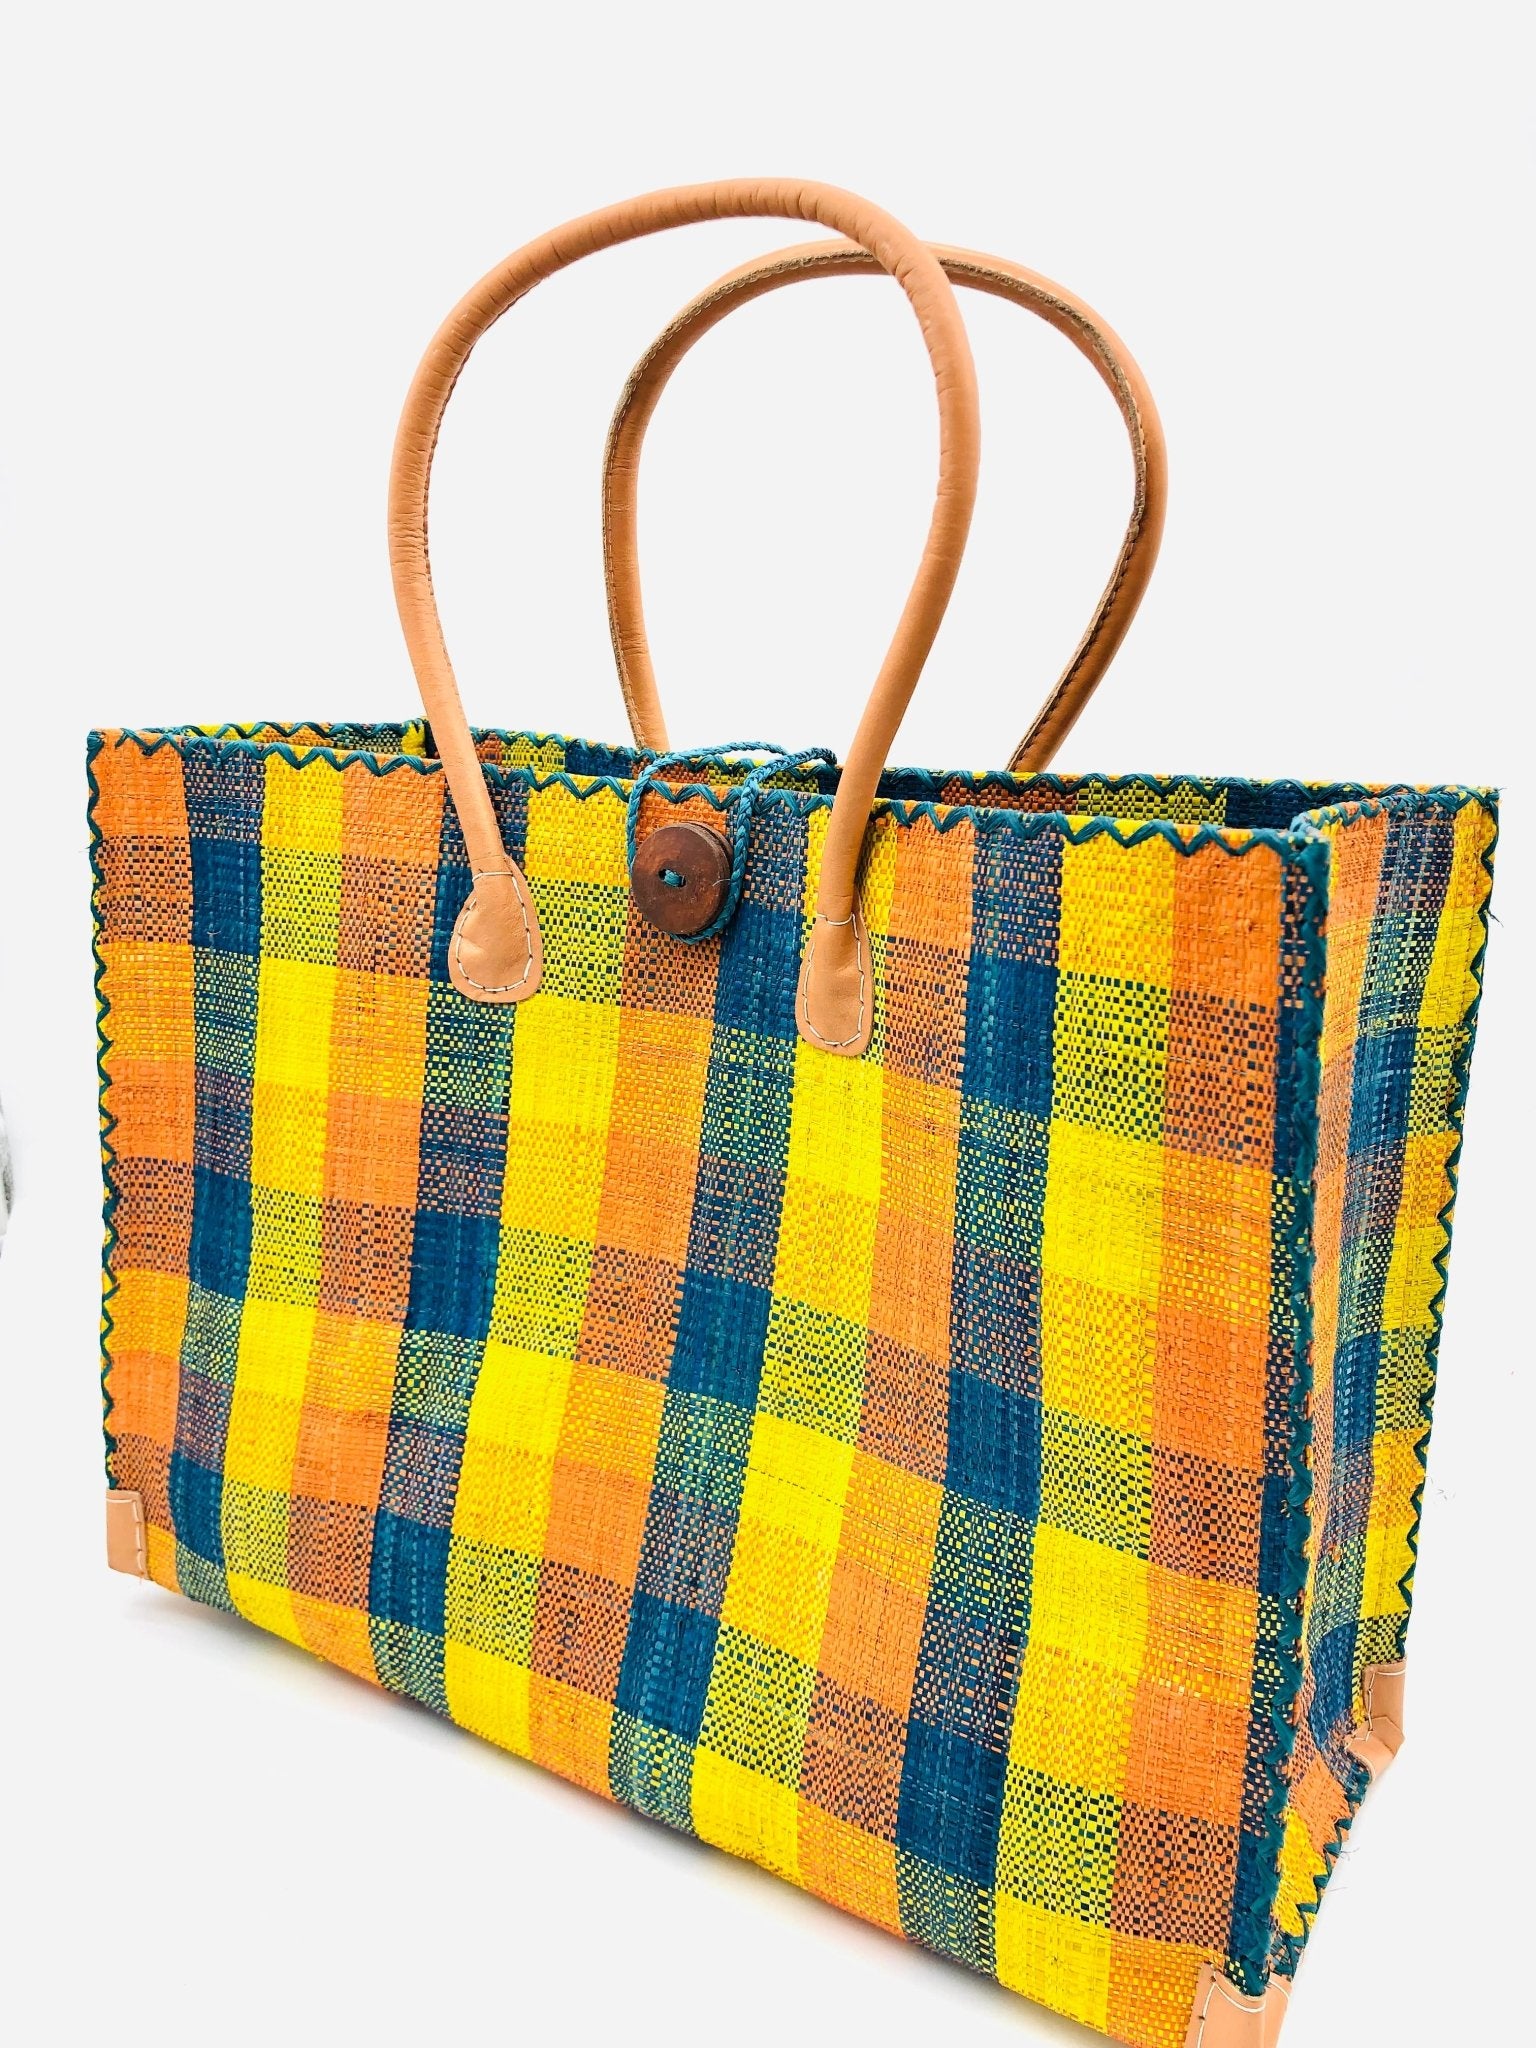 Shebobo - Zafran Gingham Large Straw Beach Bag with Plastic Liner